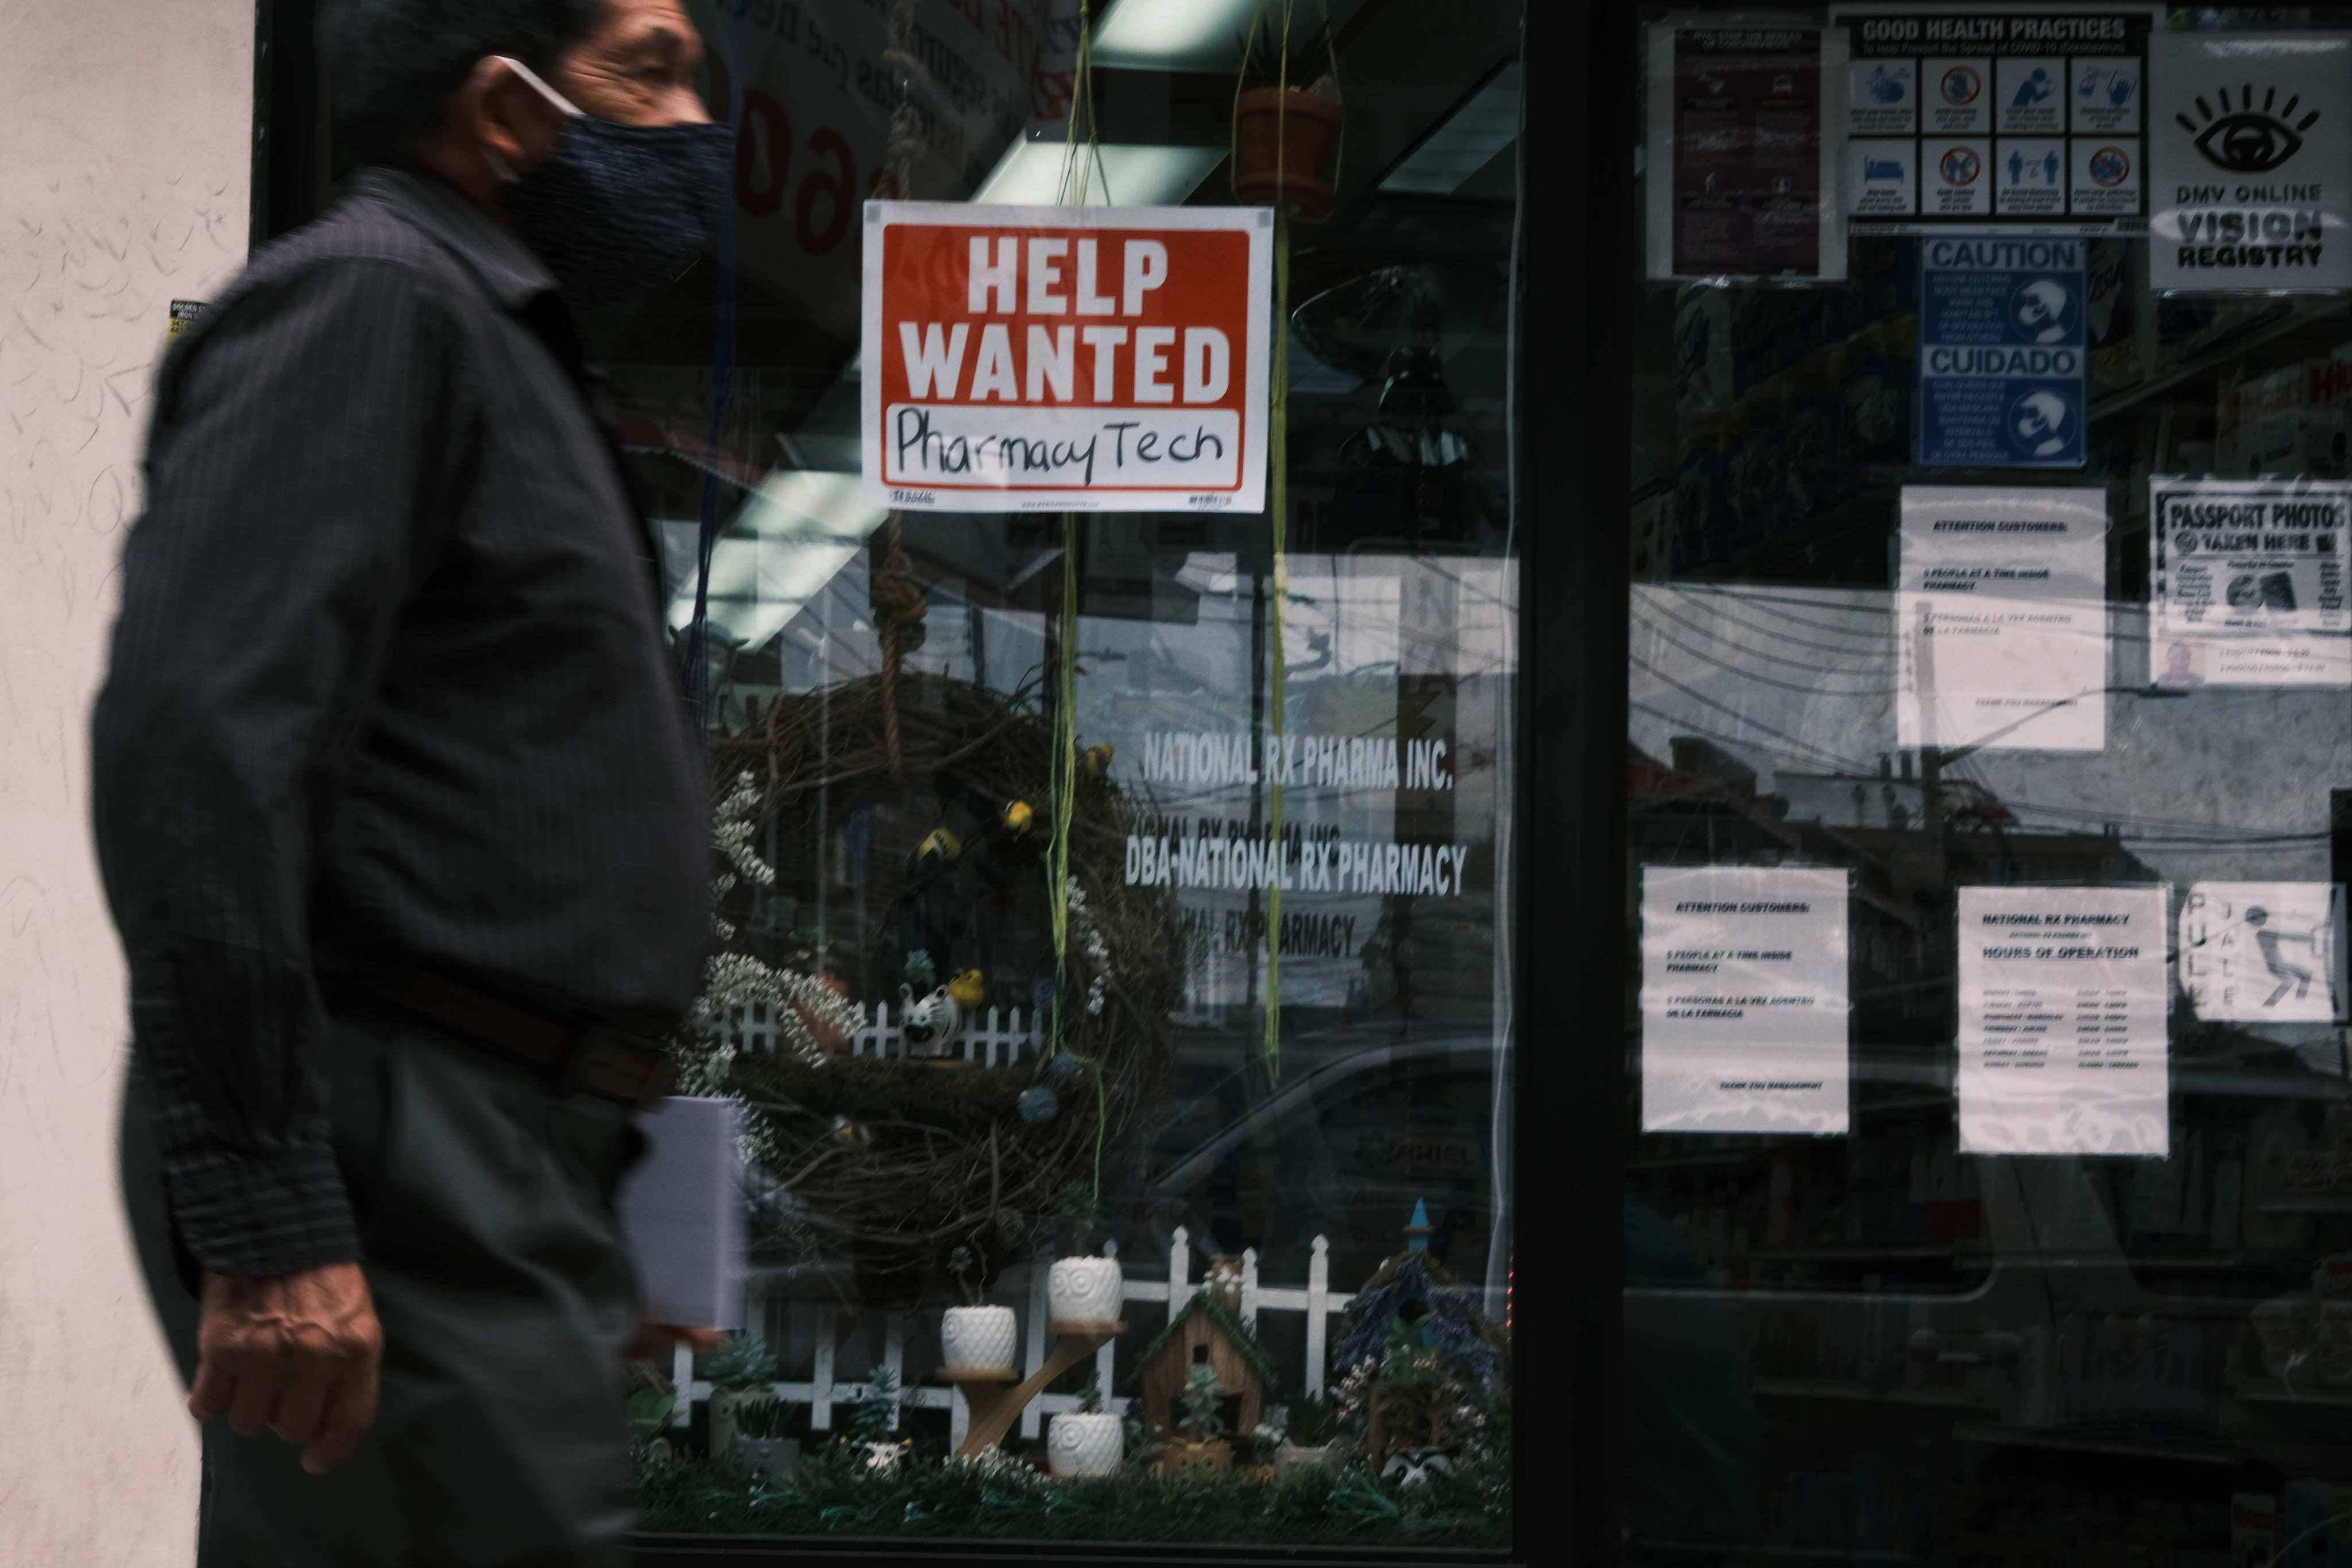 A man walks by a “Help Wanted” sign in Queens, New York, on June 4. The US economy continues to add jobs every month but millions of Americans remain unemployed. Photo: AFP